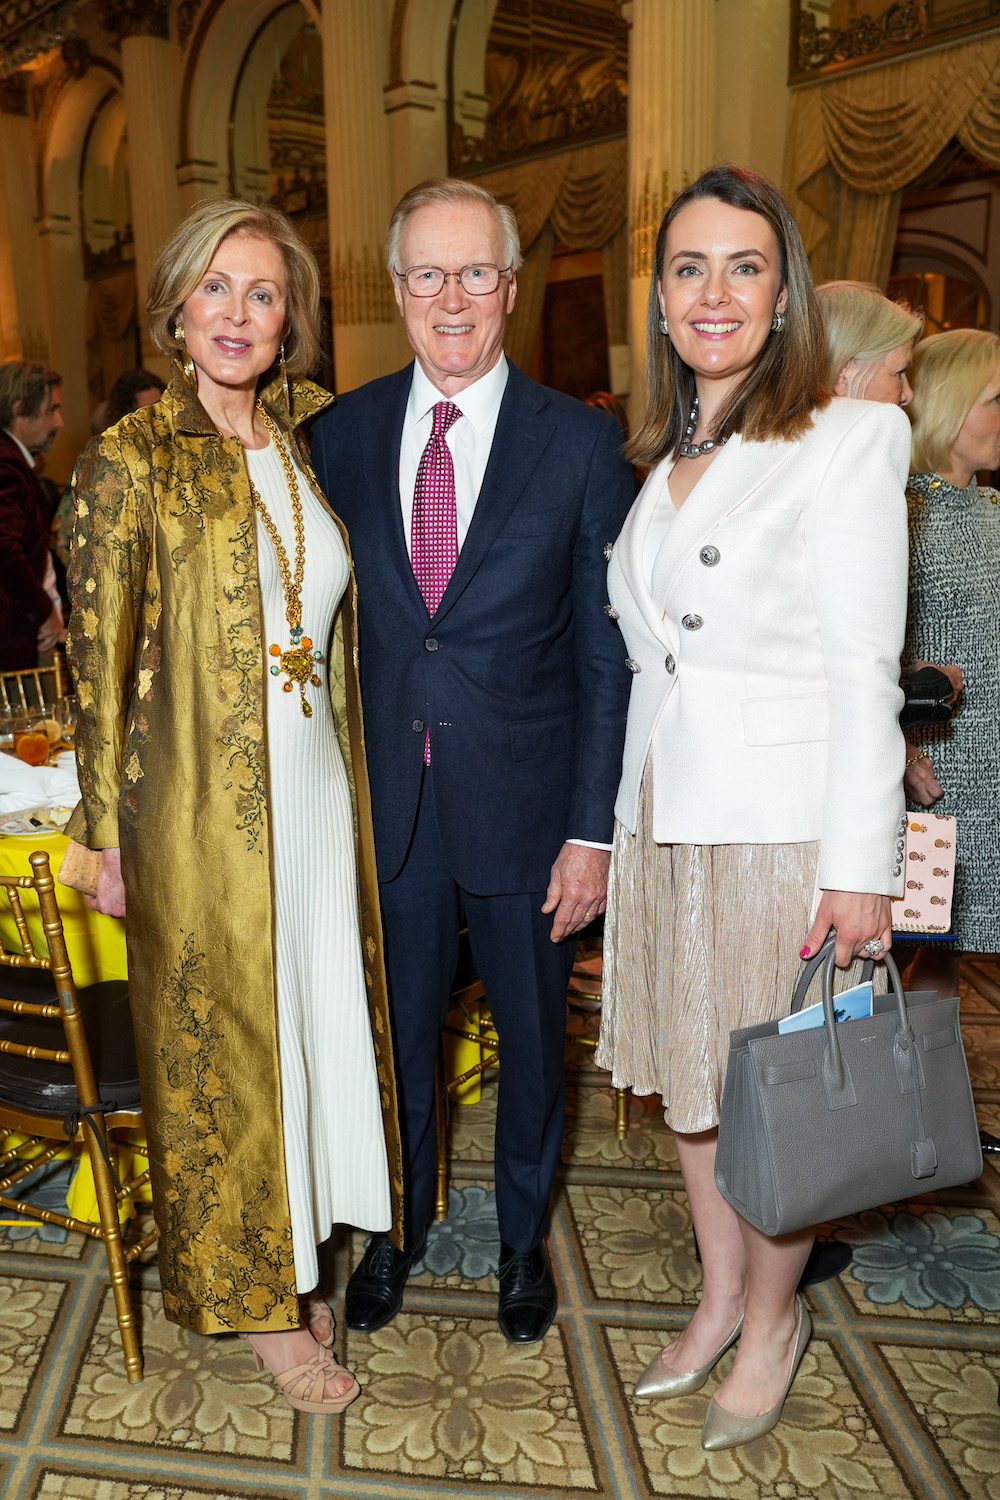 Hope For Depression Research Foundation's 17th Annual HOPE Luncheon